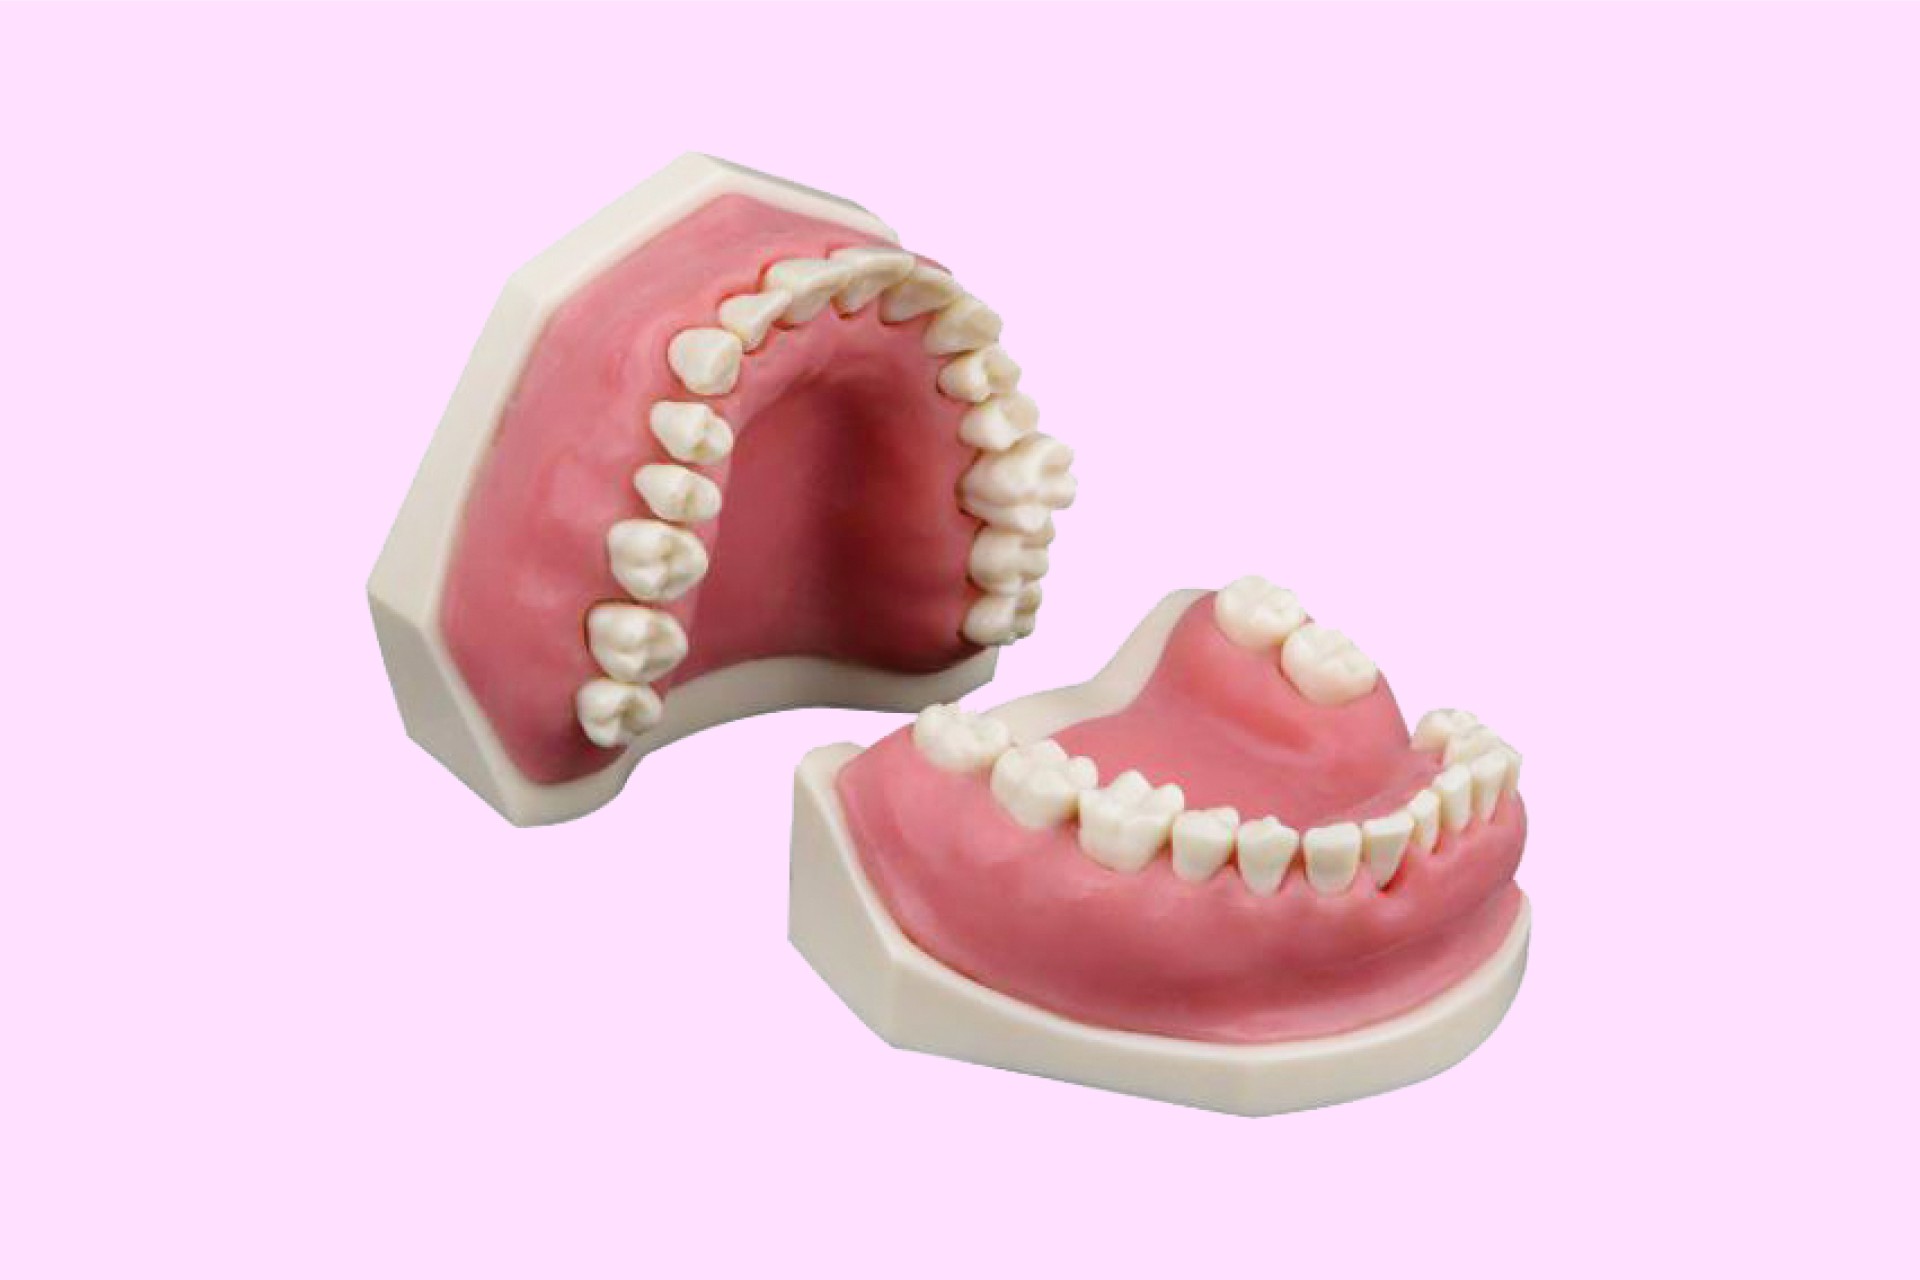 Periodontics Training Arch with Matte Pink Soft Gum